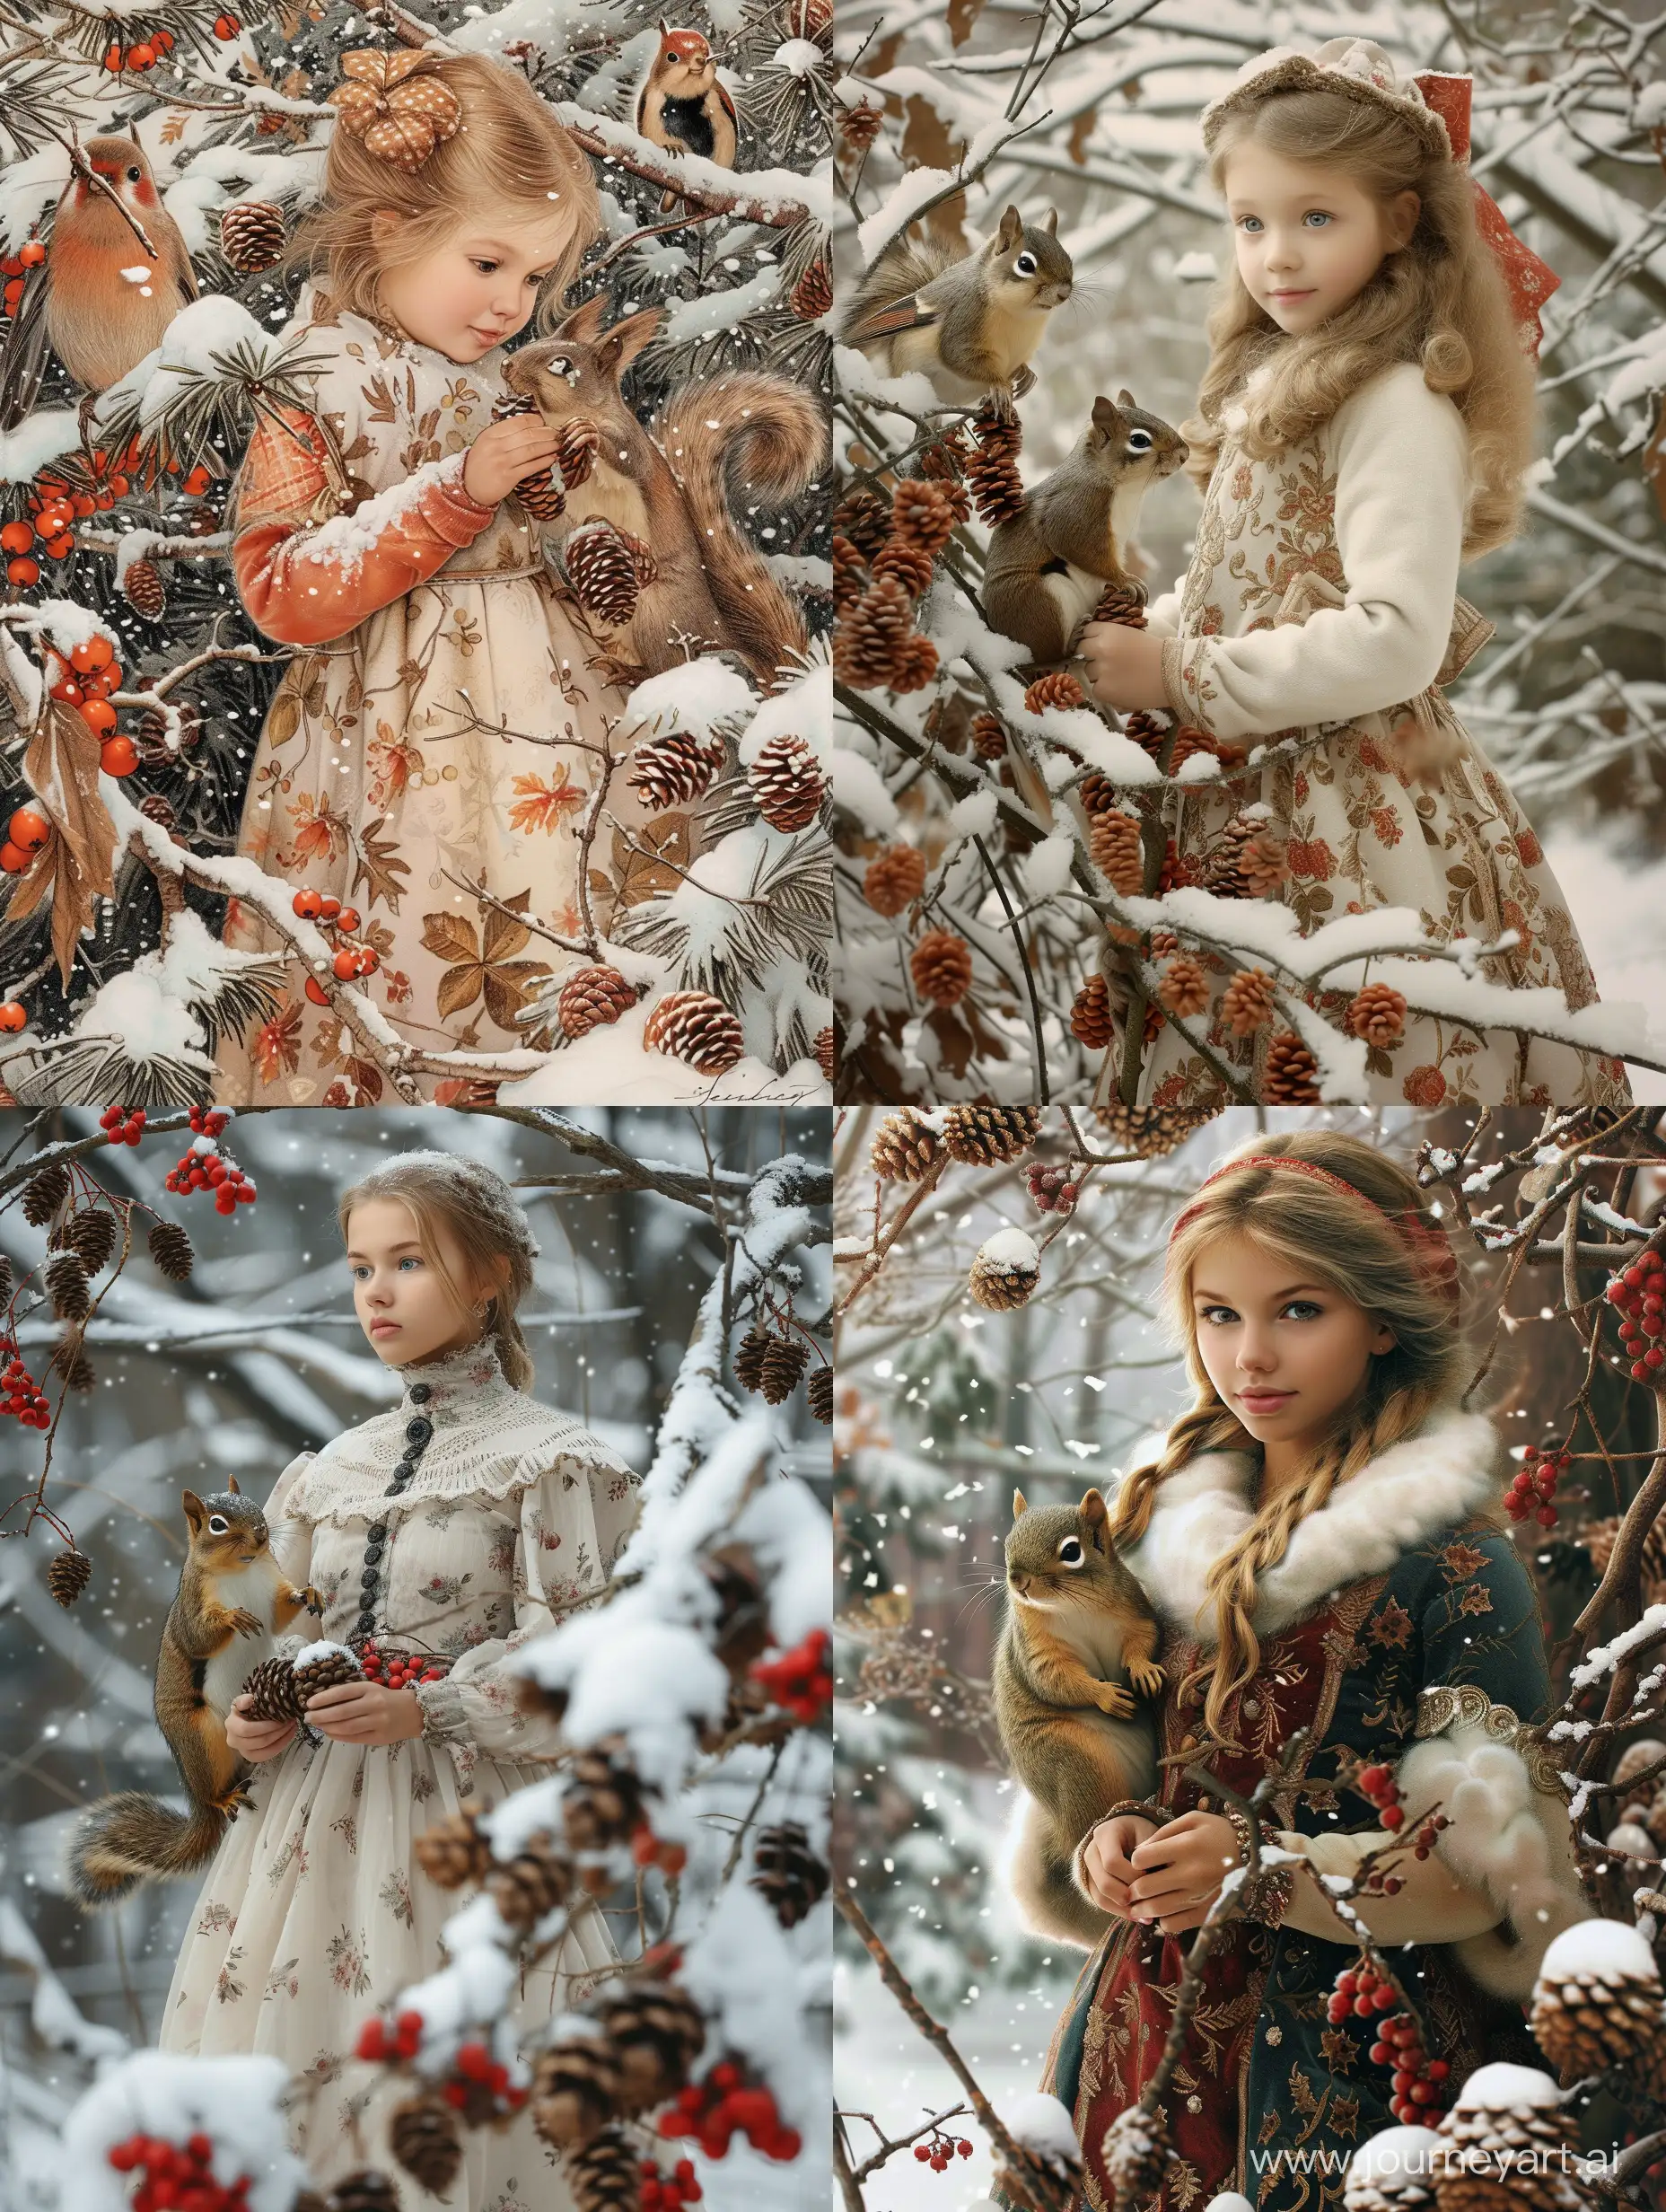 Charming-Winter-Scene-with-a-Girl-in-a-Festive-Dress-Surrounded-by-Snow-Bullfinches-Rowan-and-Squirrel